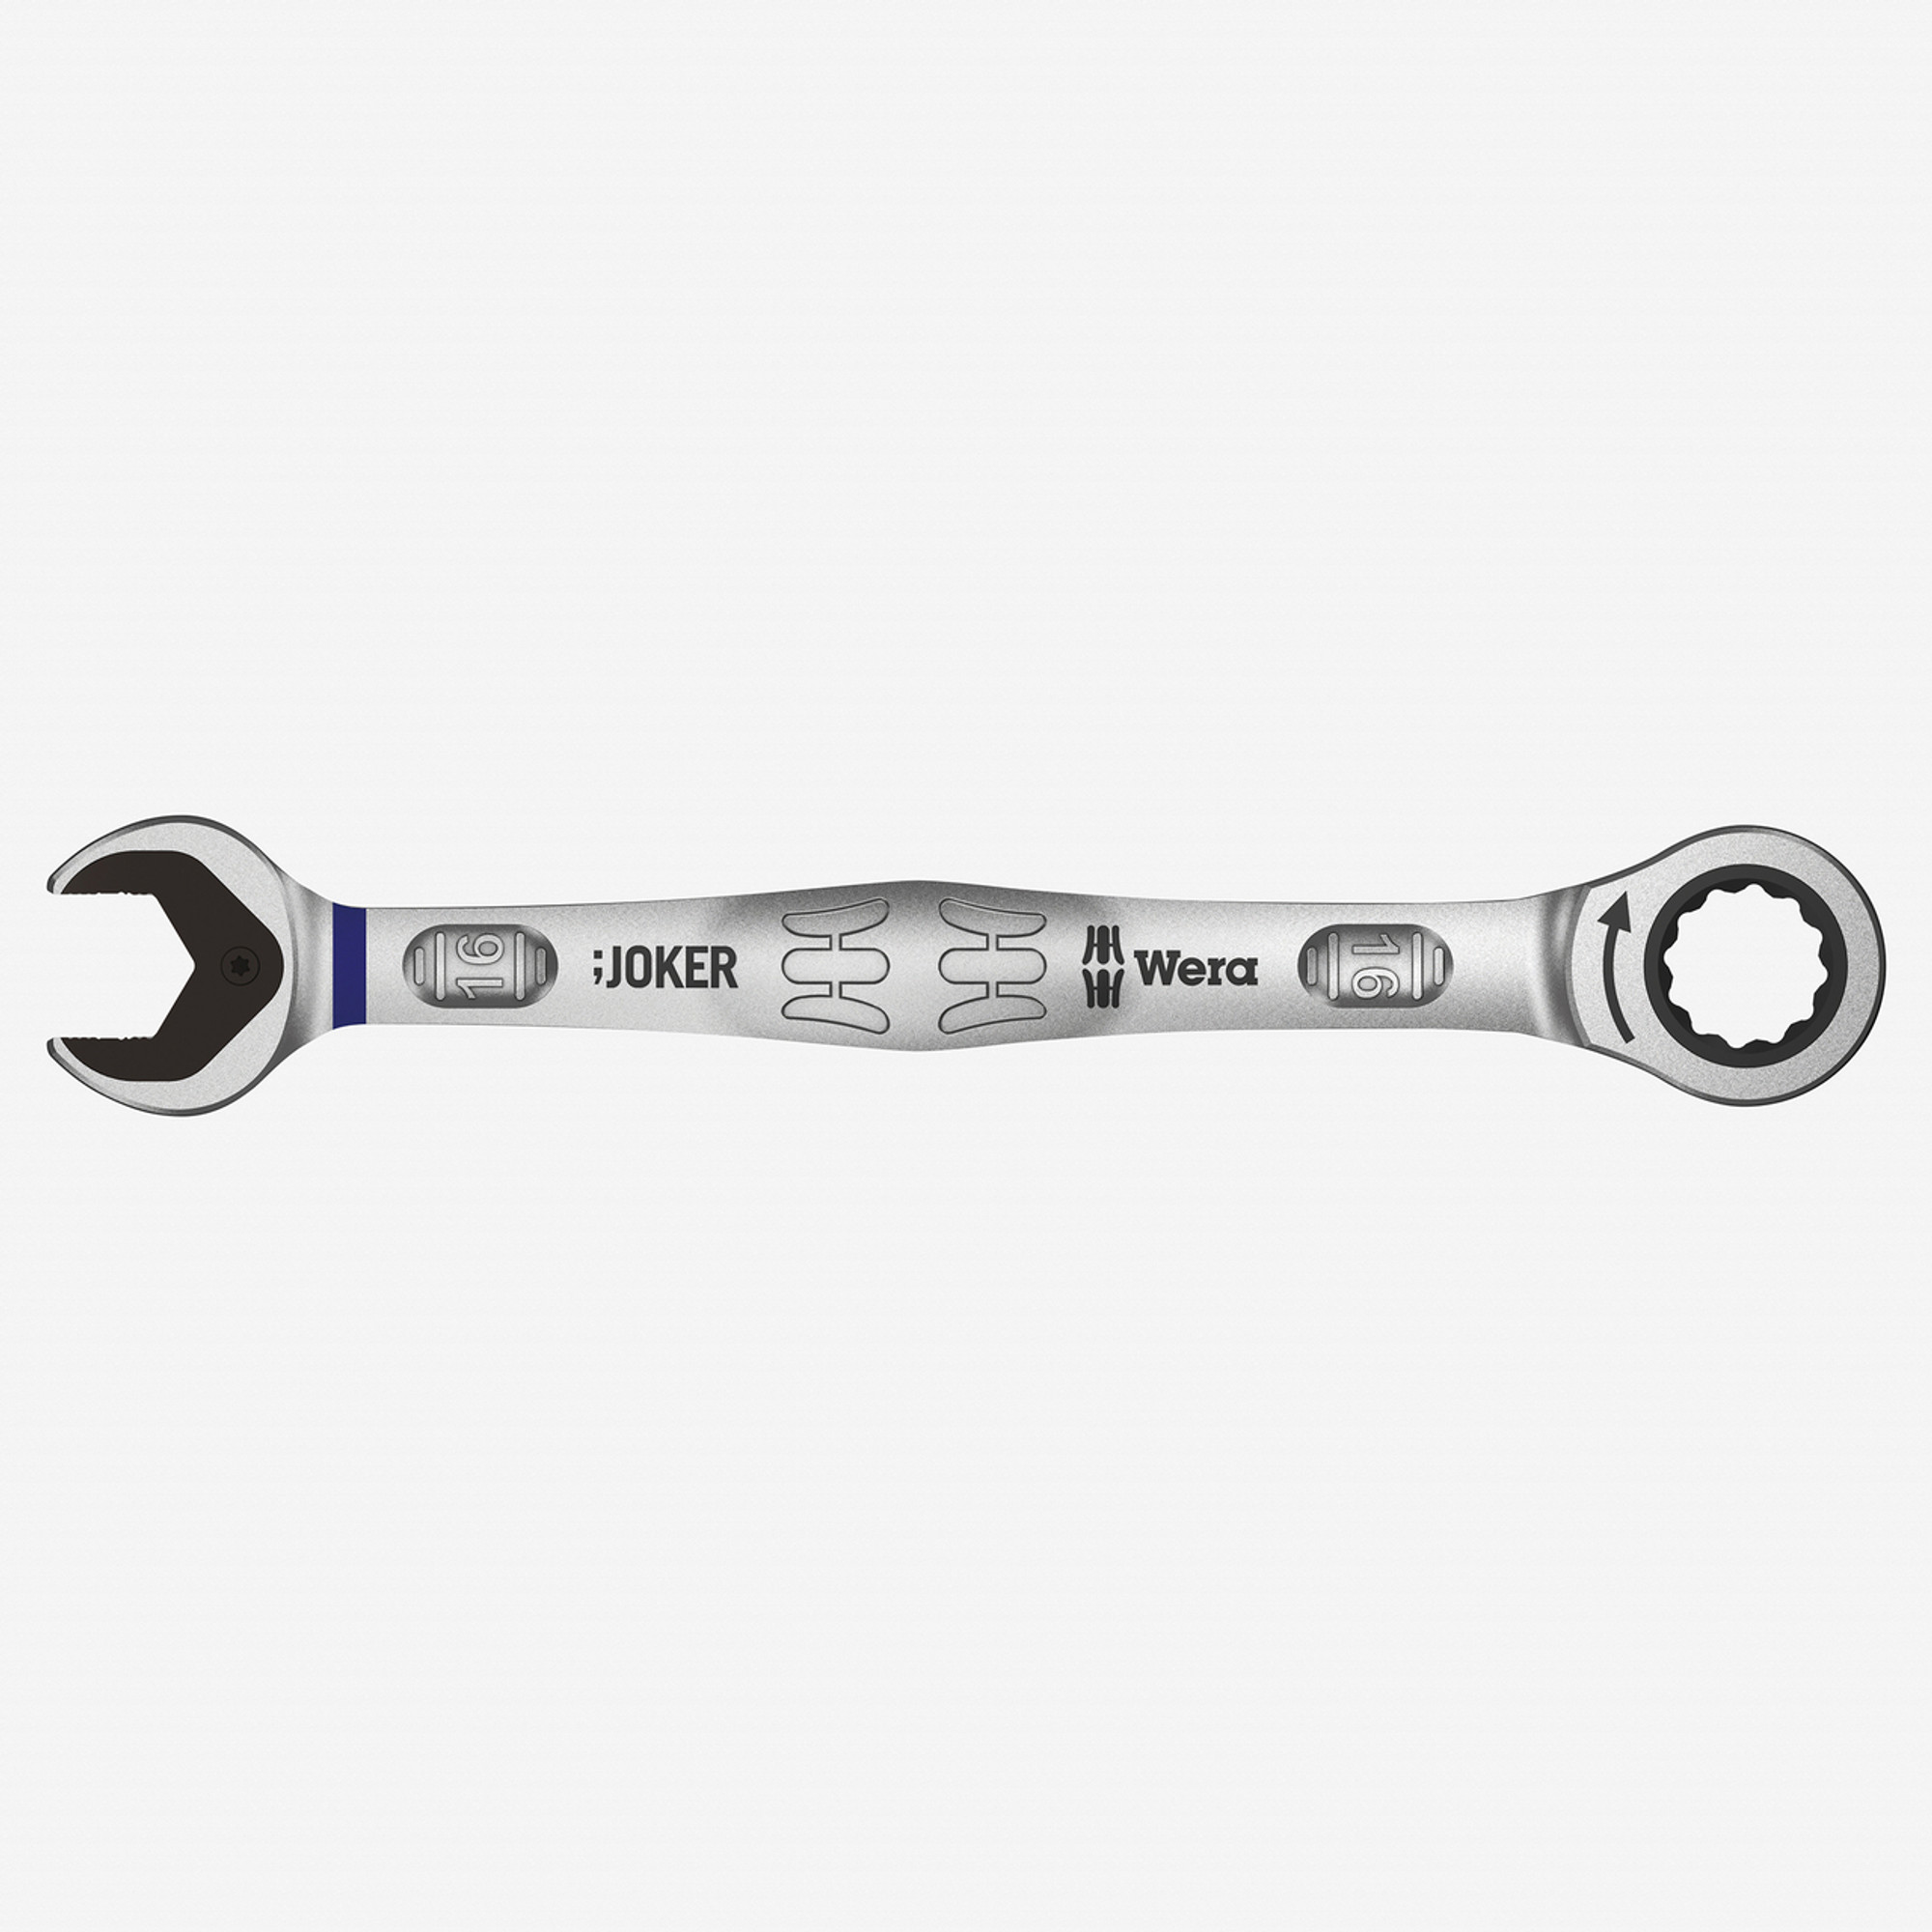 Wera Tools 05073284001 Joker SW 9/16 SB RATCHETING Combo Wrench, One Size,  Multi: Box End Wrenches: : Tools & Home Improvement